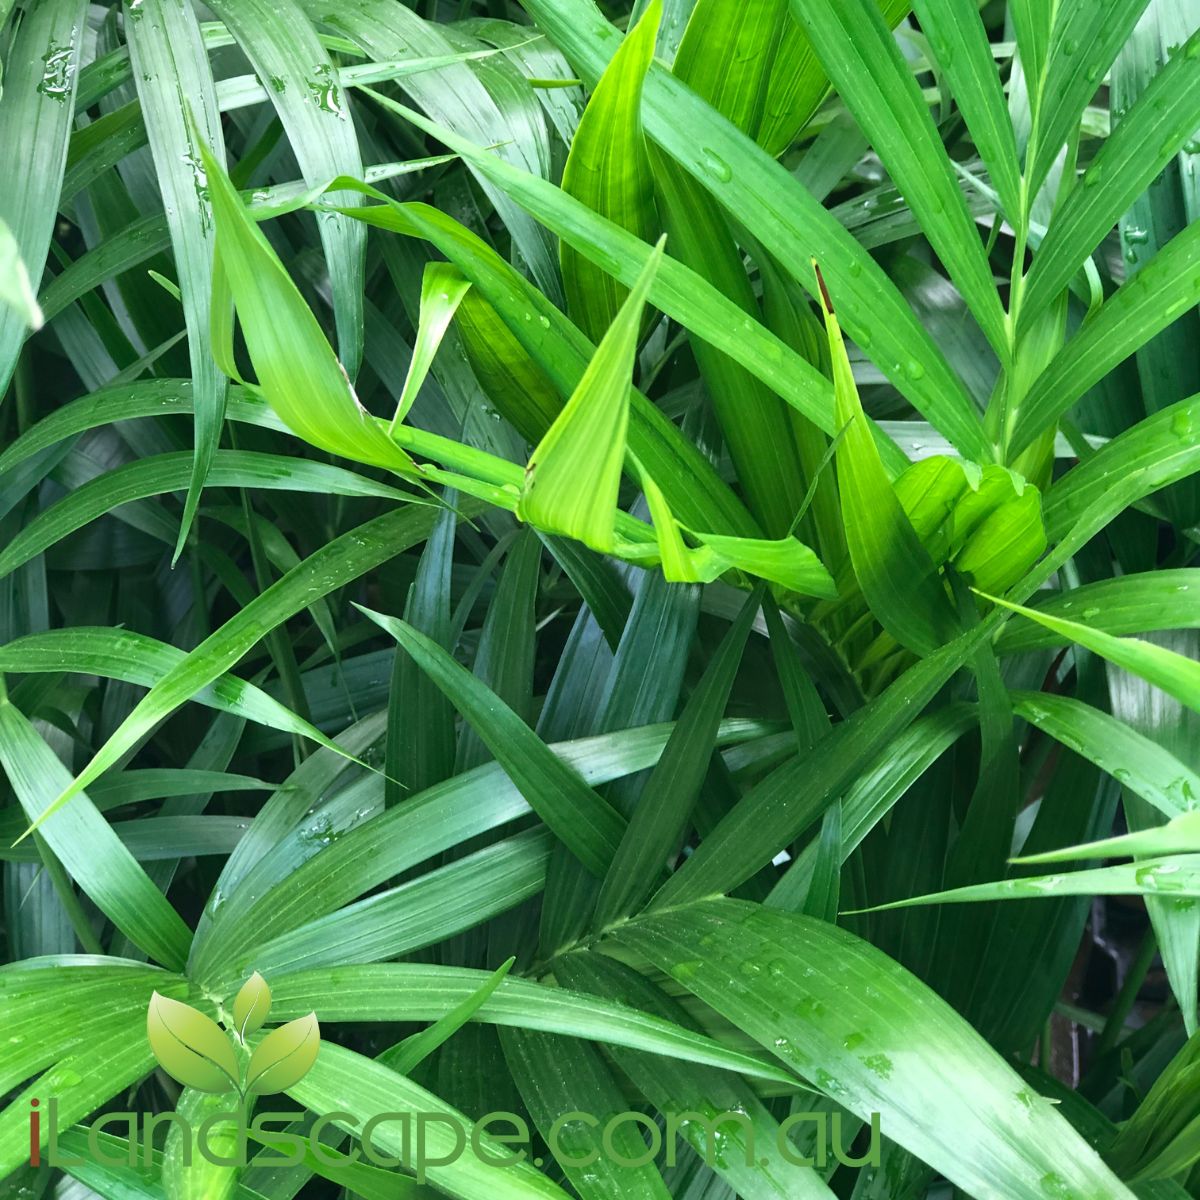 Chamaedorea Atrovirens commonly known as Cascade palm make an excellent indoor plant as well as a great filler in a tropical garden. Can tolerate Full sun however grows best in part shade to shade areas